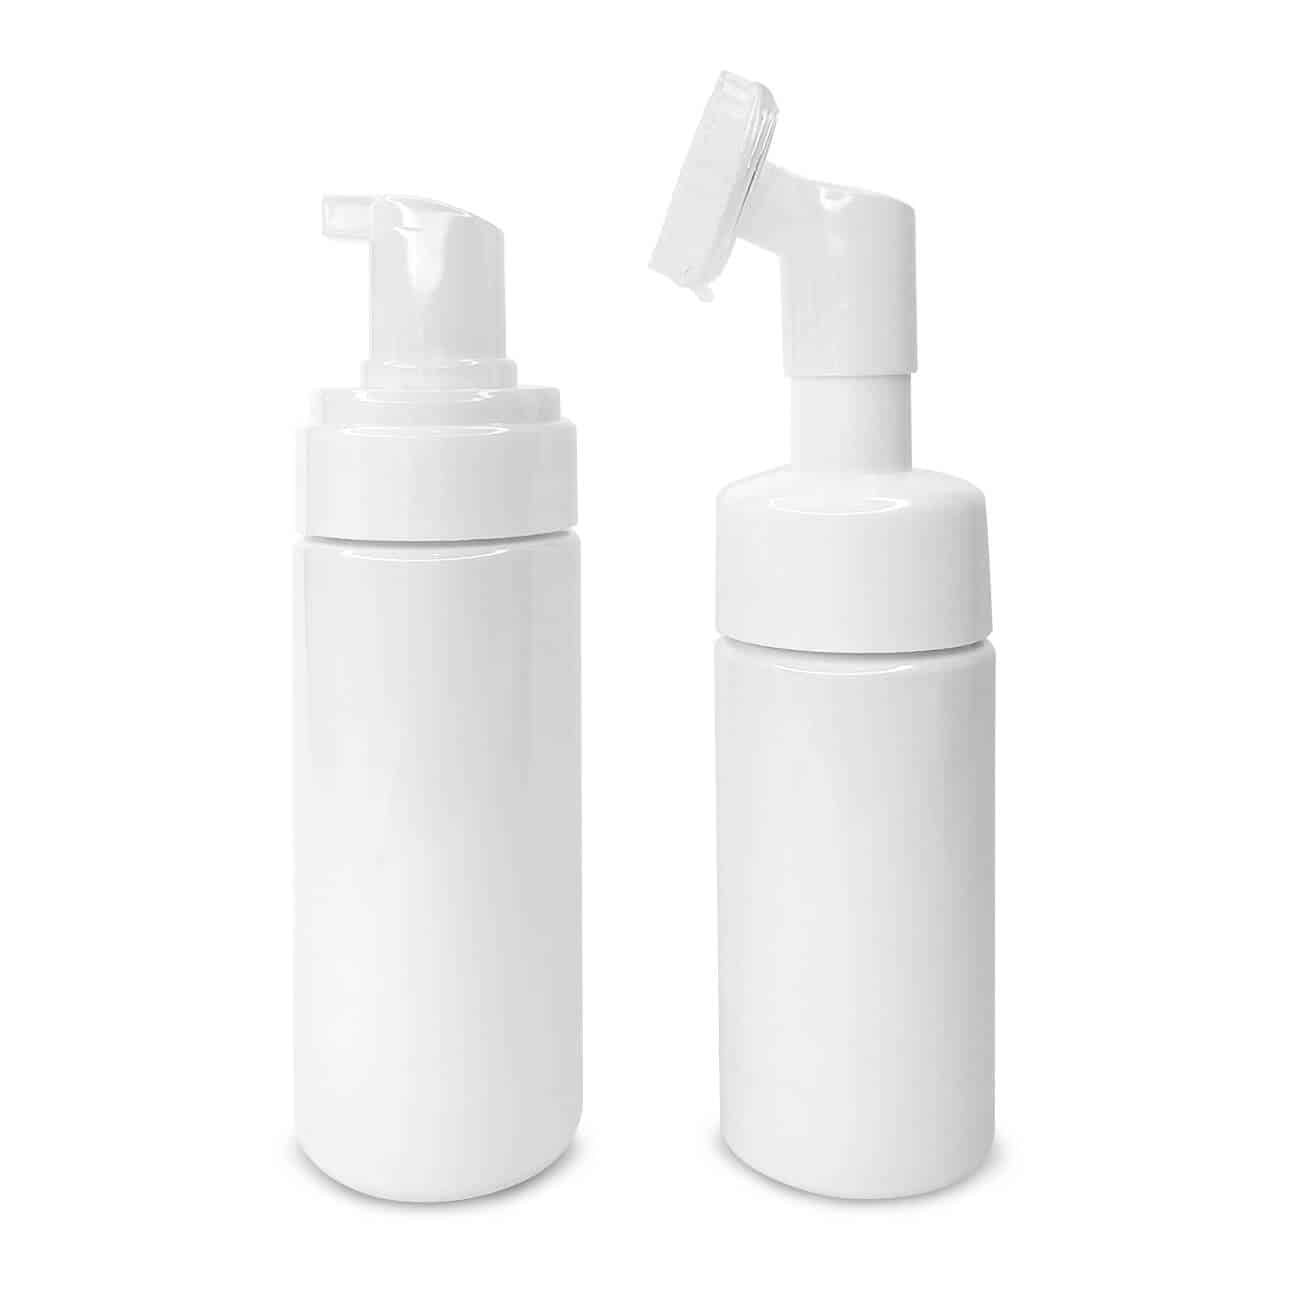 Click this to browse Airless & Foaming Pump Bottles